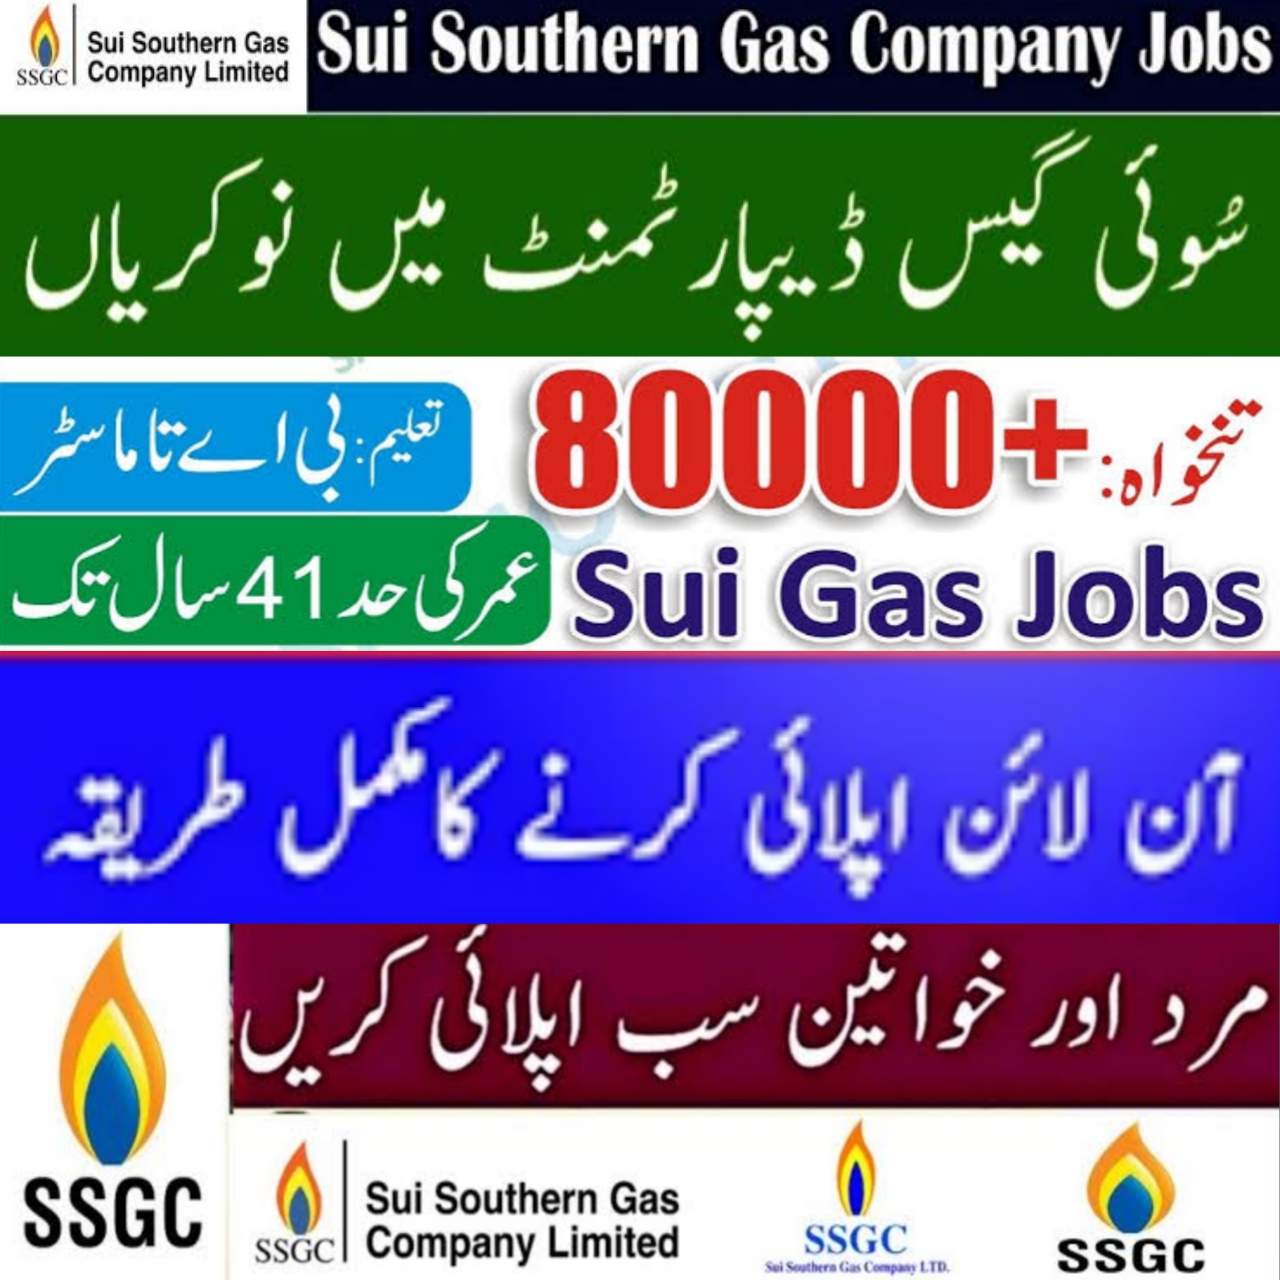 SSGC- Sui Southern Gas Company Jobs 2022 || Apply Now Fast